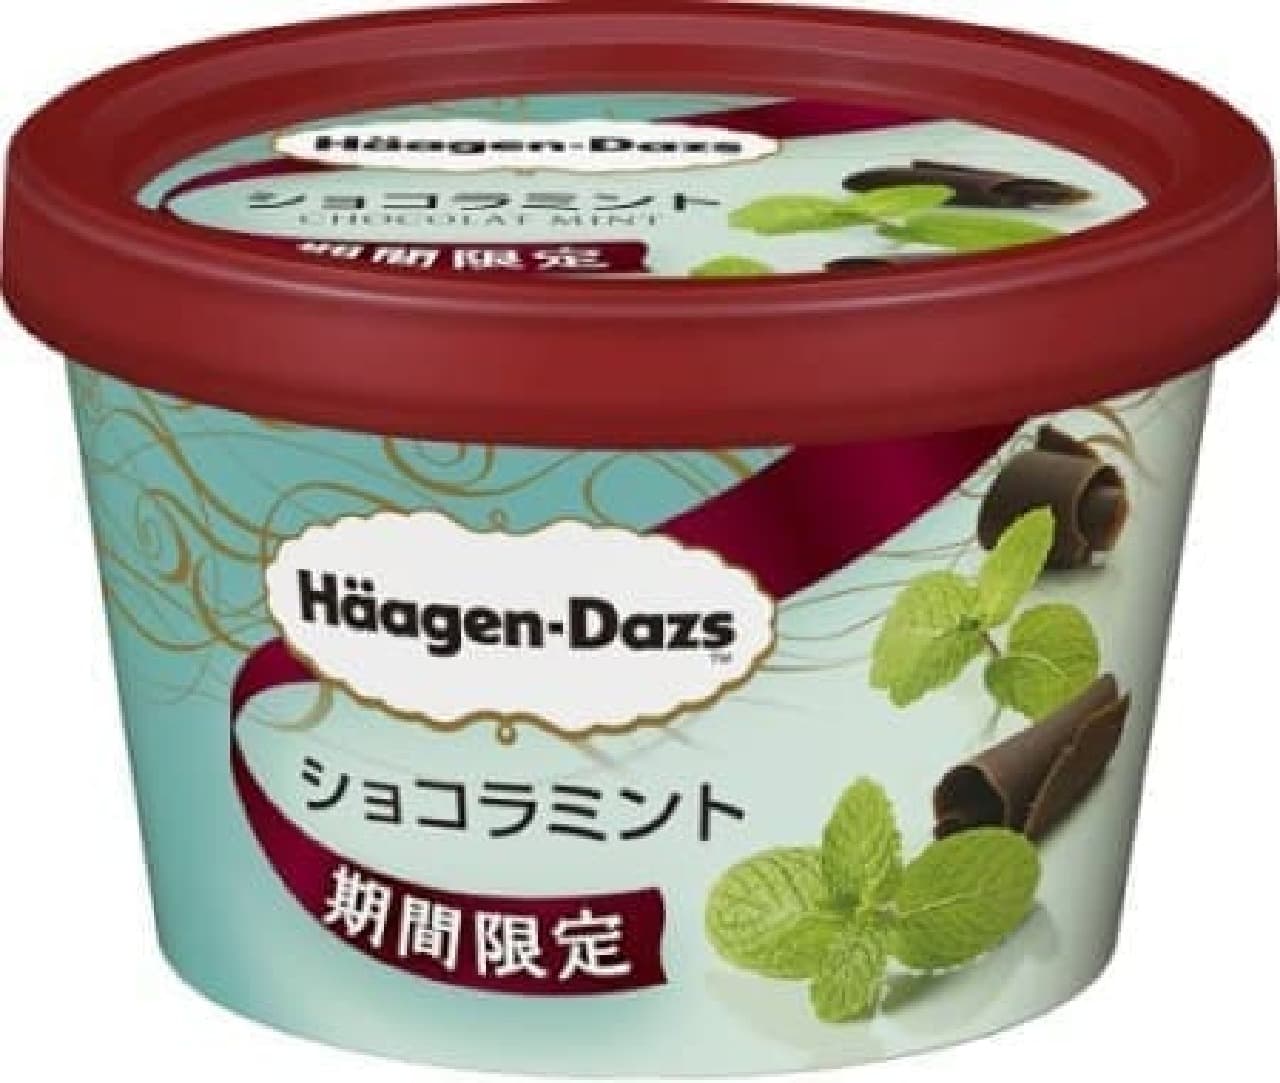 Refreshing taste of mint ice cream and chocolate chips